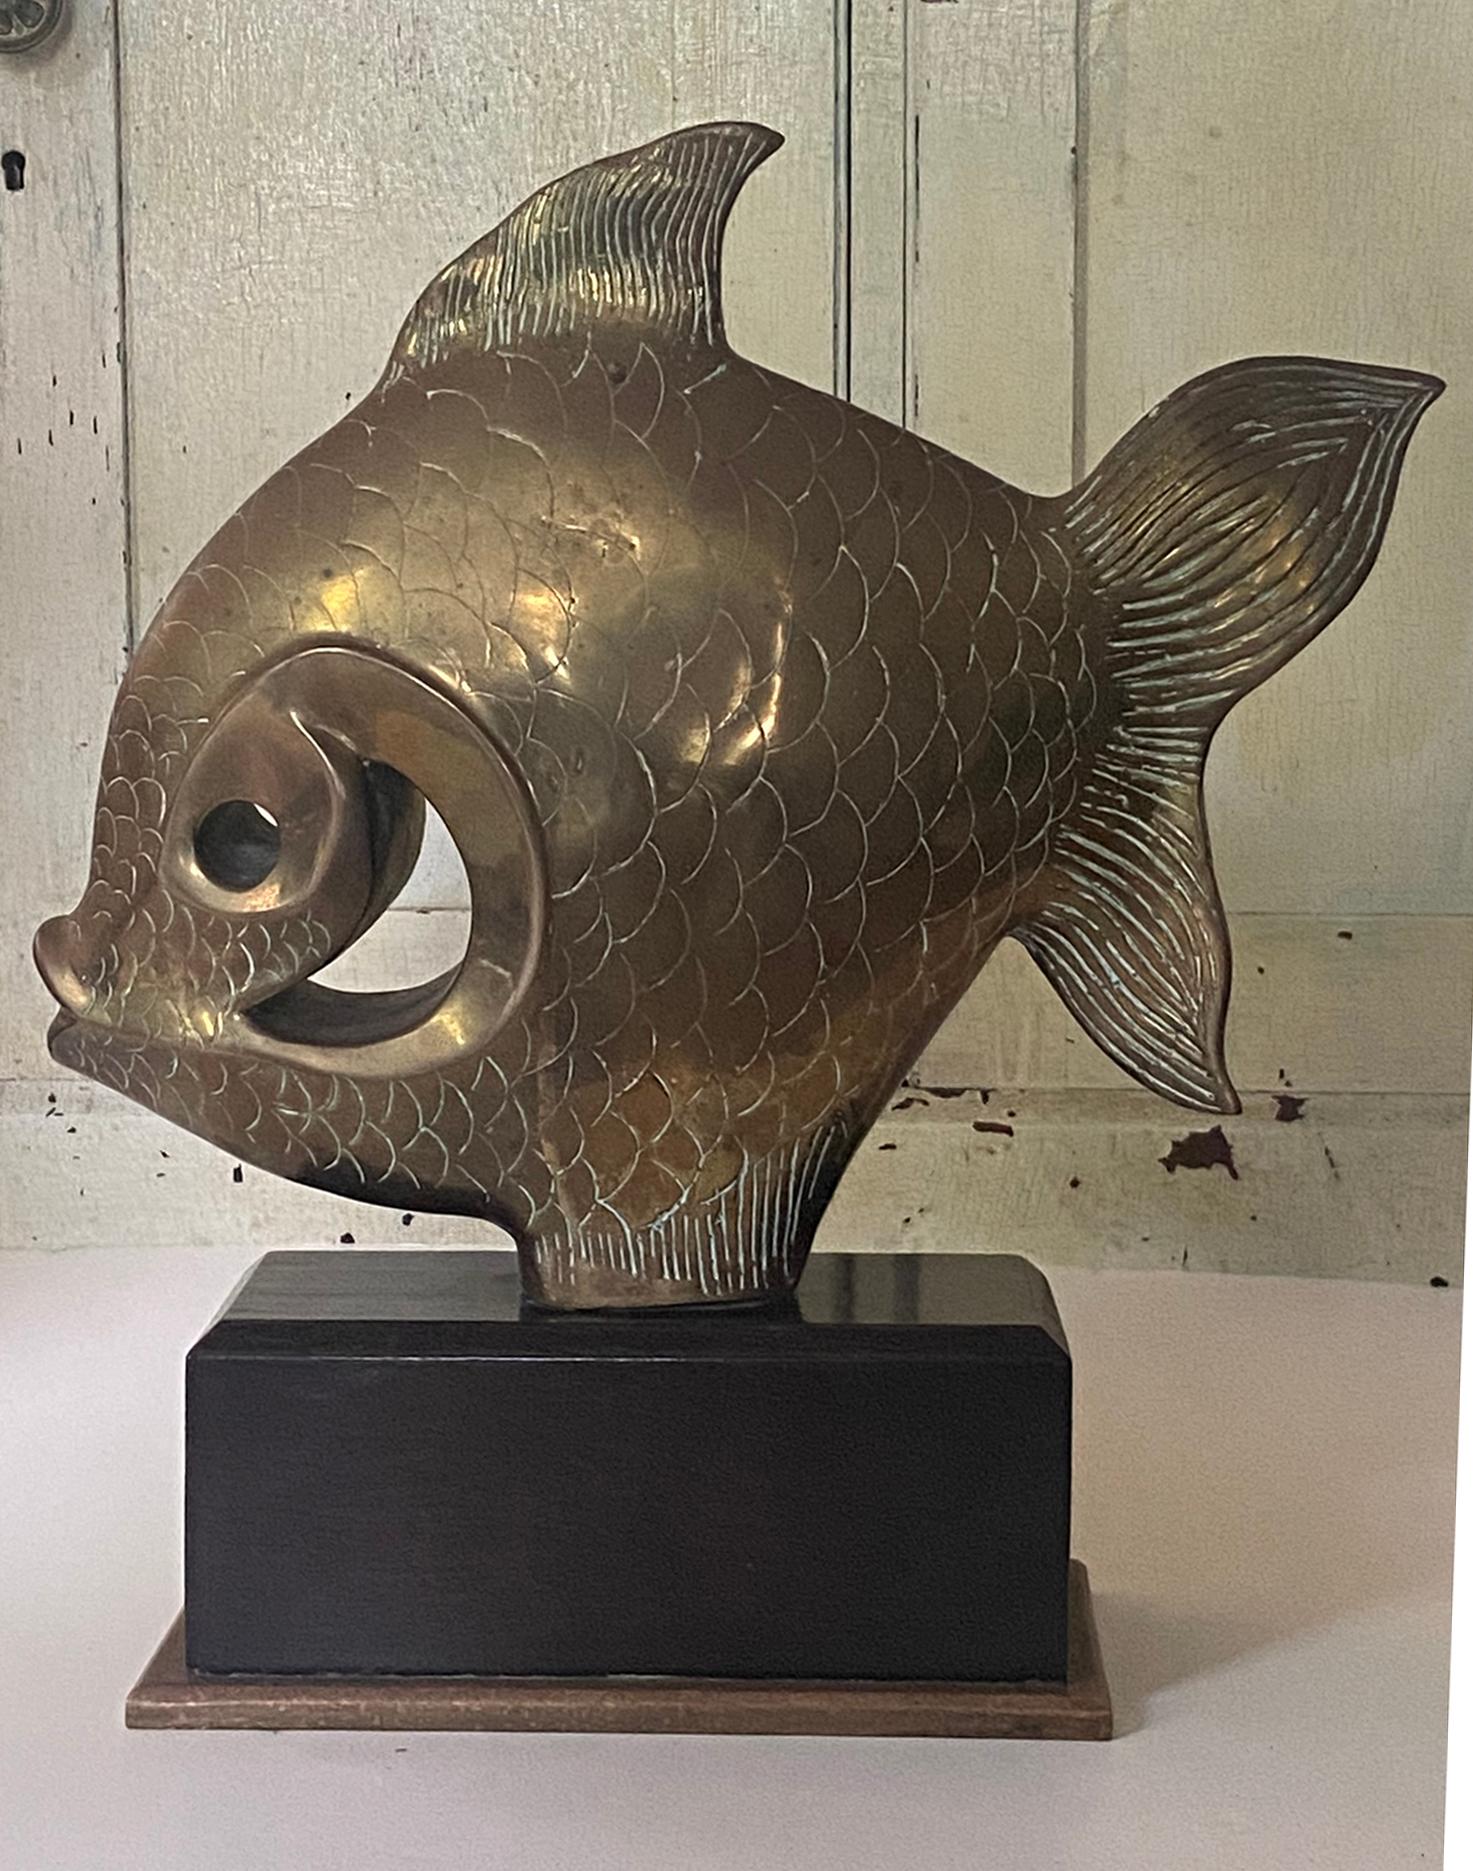 Vintage Bronze or Brass Fish Sculpture on Wooden Base 1980s In Good Condition For Sale In West Palm Beach, FL